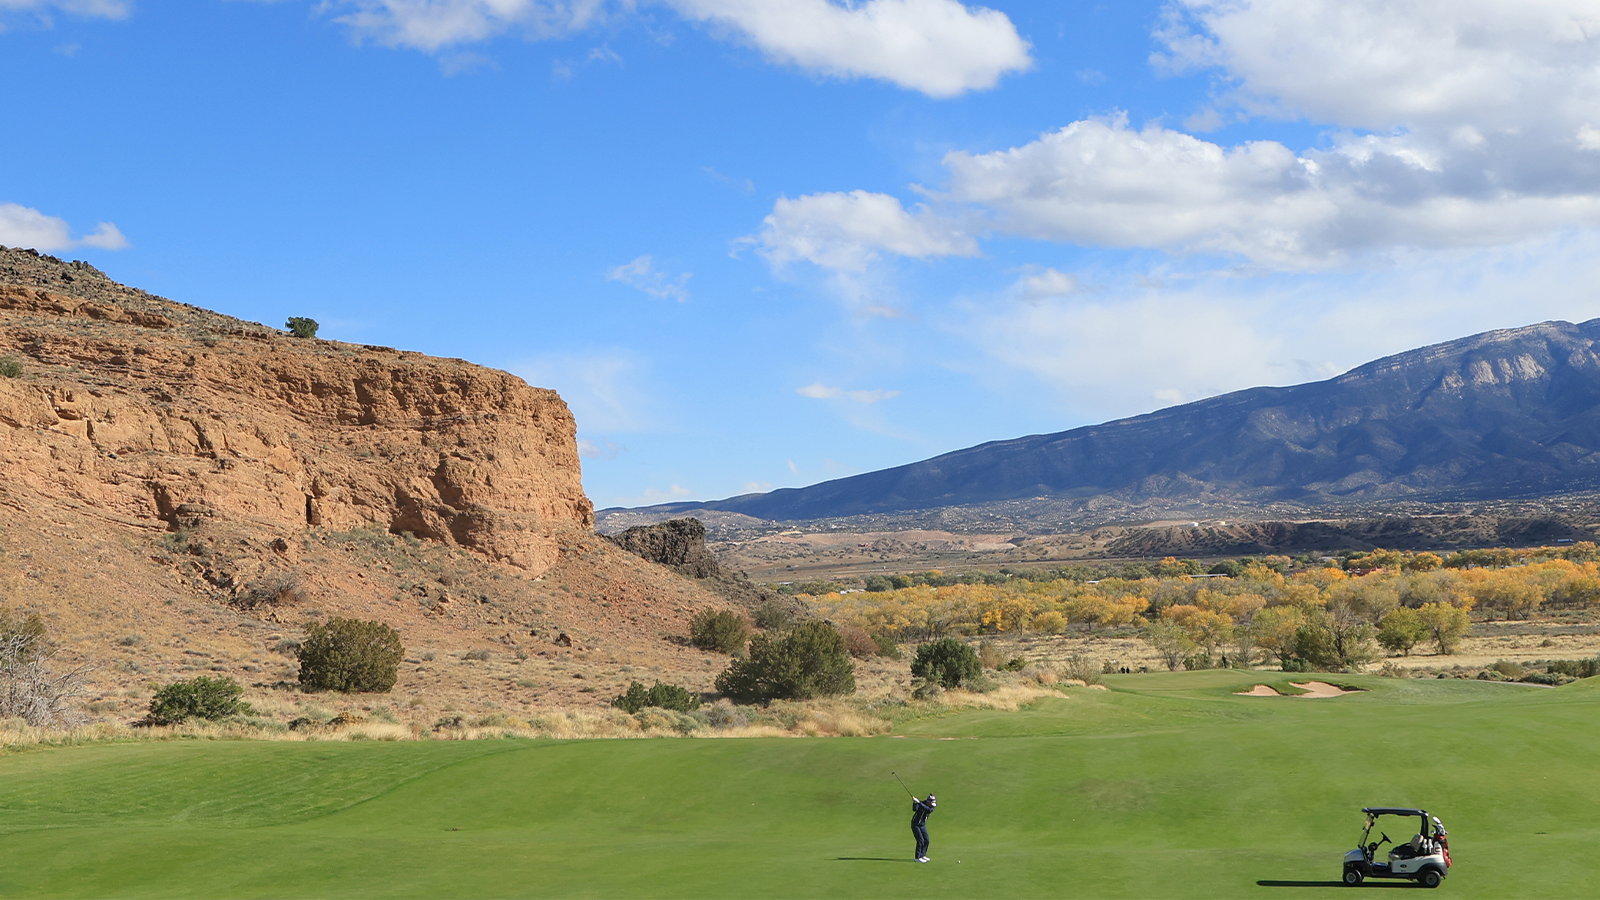 Ashley Grier of Team USA plays her shot on the sixteenth hole during the first round of the 2nd Women's PGA Cup at Twin Warriors Golf Club on Thursday, October 27, 2022 in Santa Ana Pueblo, New Mexico. (Photo by Sam Greenwood/PGA of America)